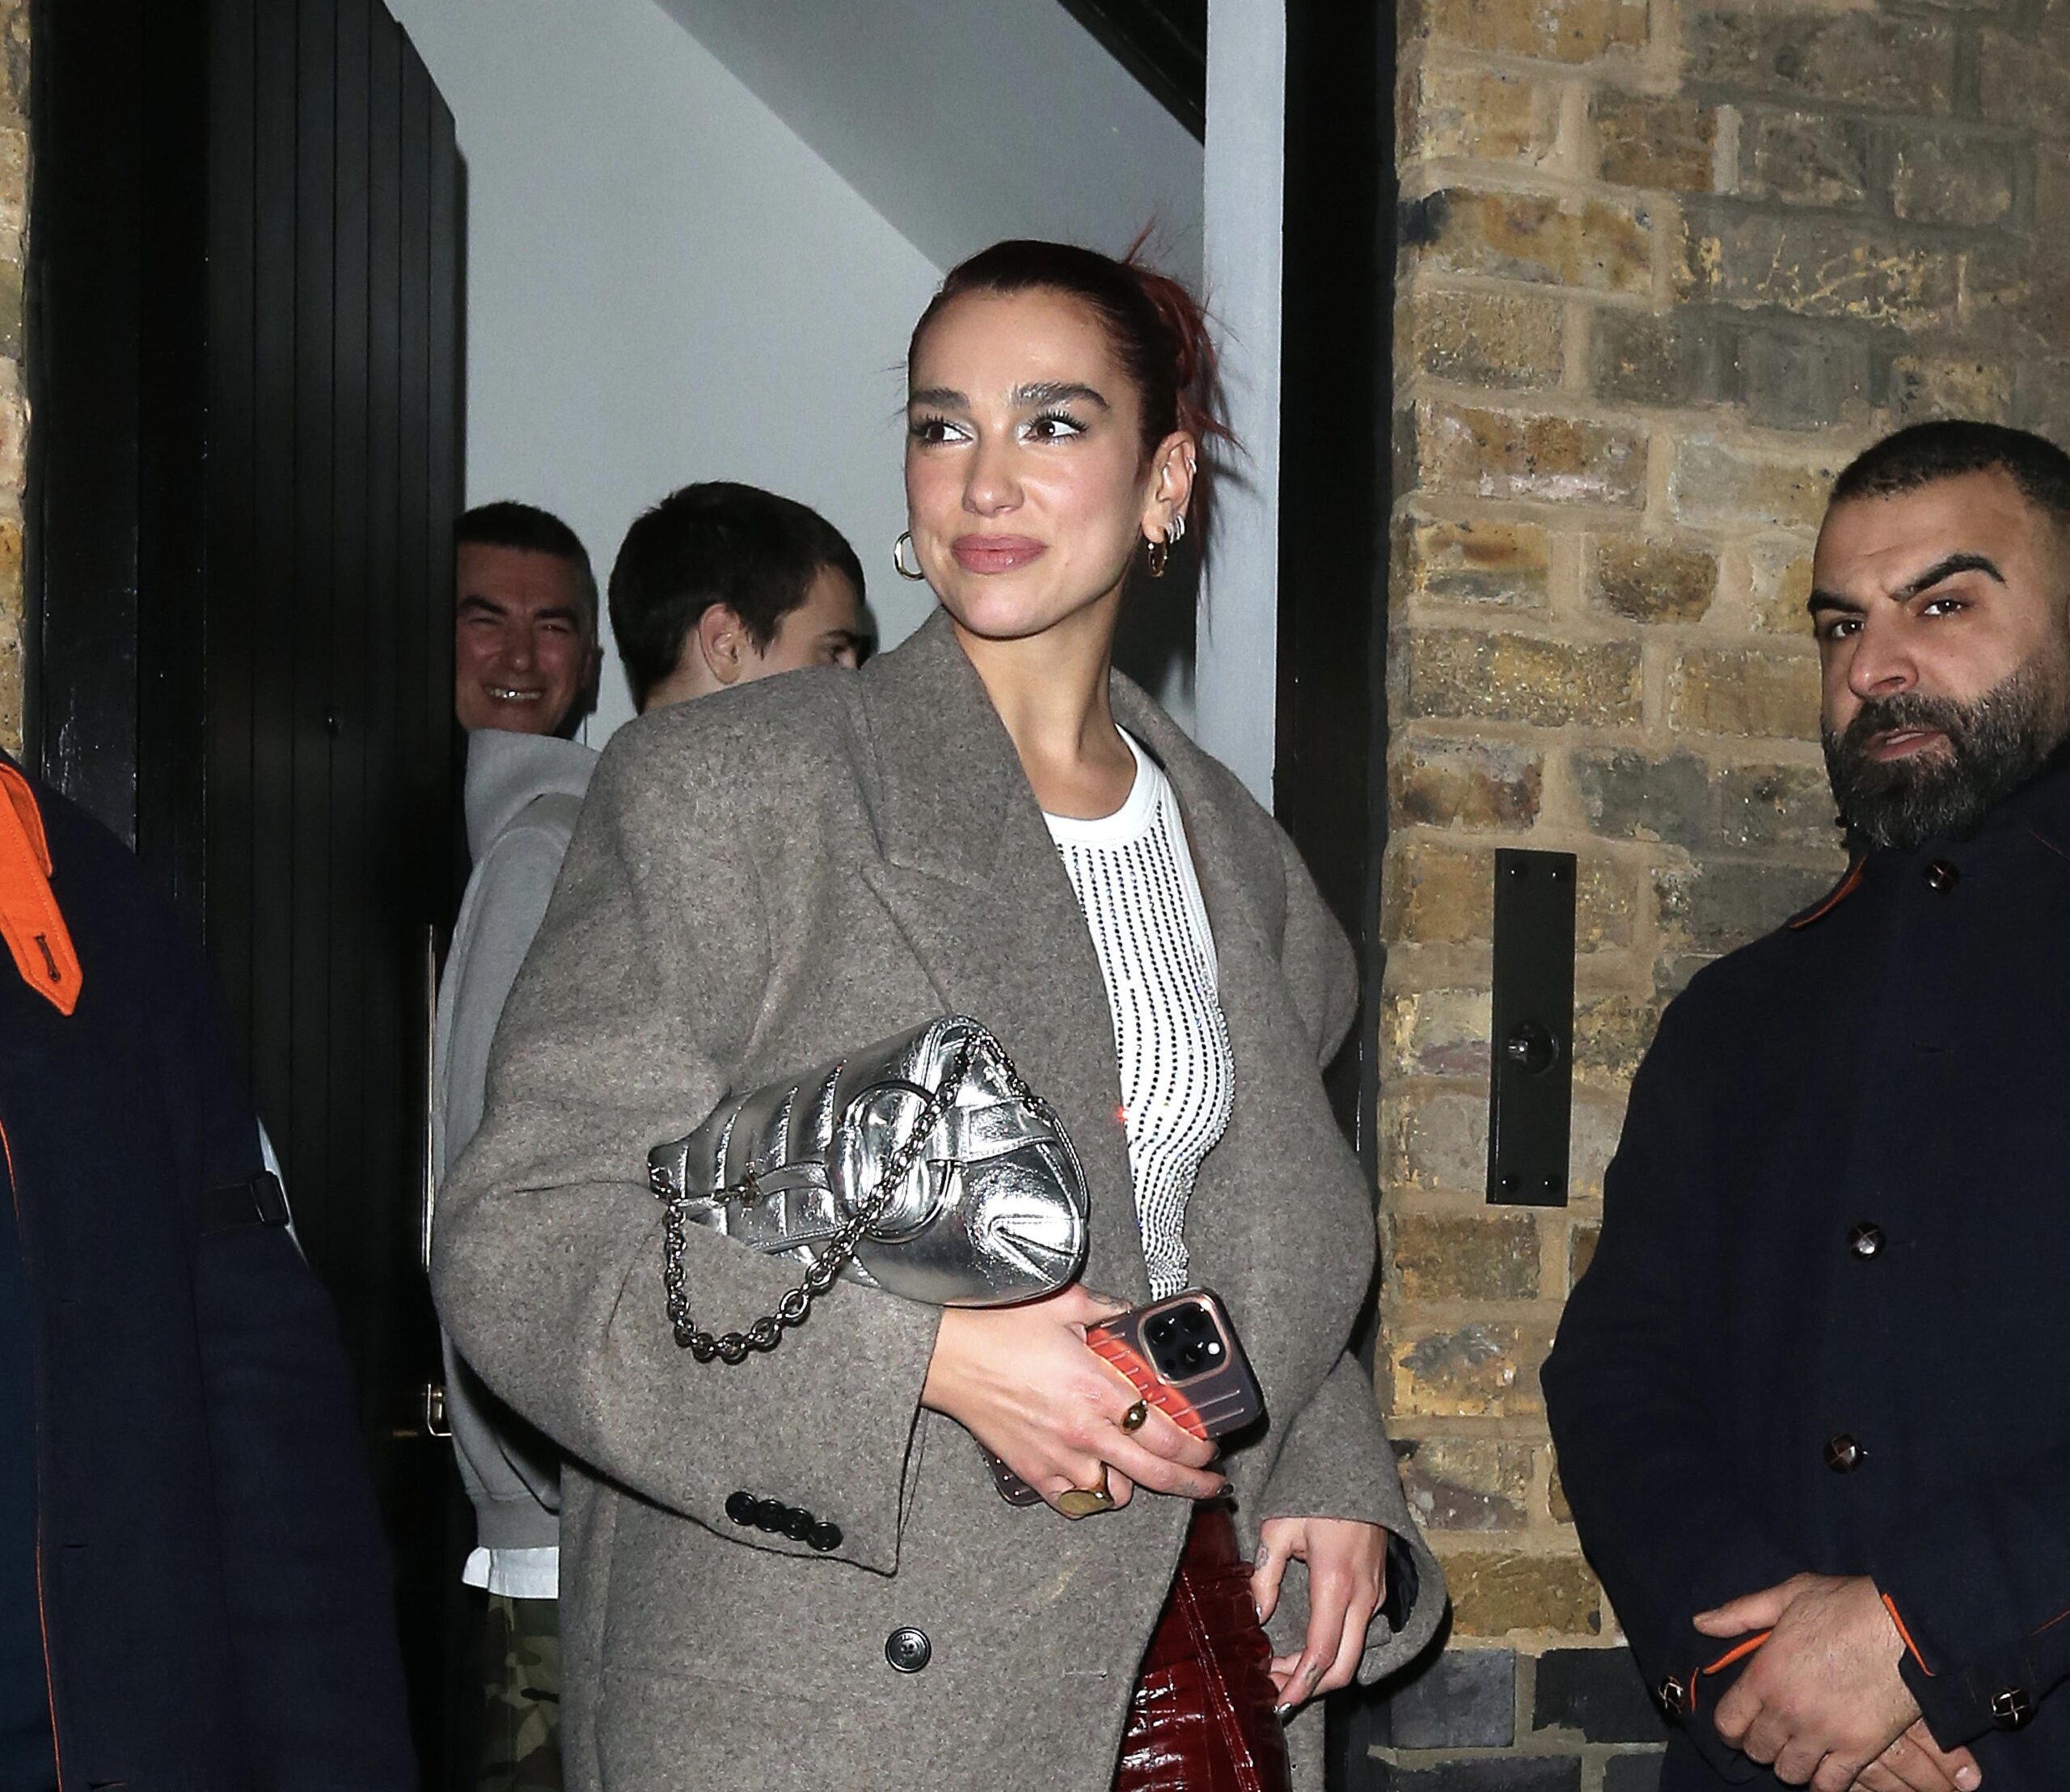 Dua Lipa, leaving The Chiltern Firehouse in London, combines classic and contemporary elements with a grey overcoat, metallic clutch, red vinyl trousers, and white-heeled boots, creating a look that is both timeless and modern.